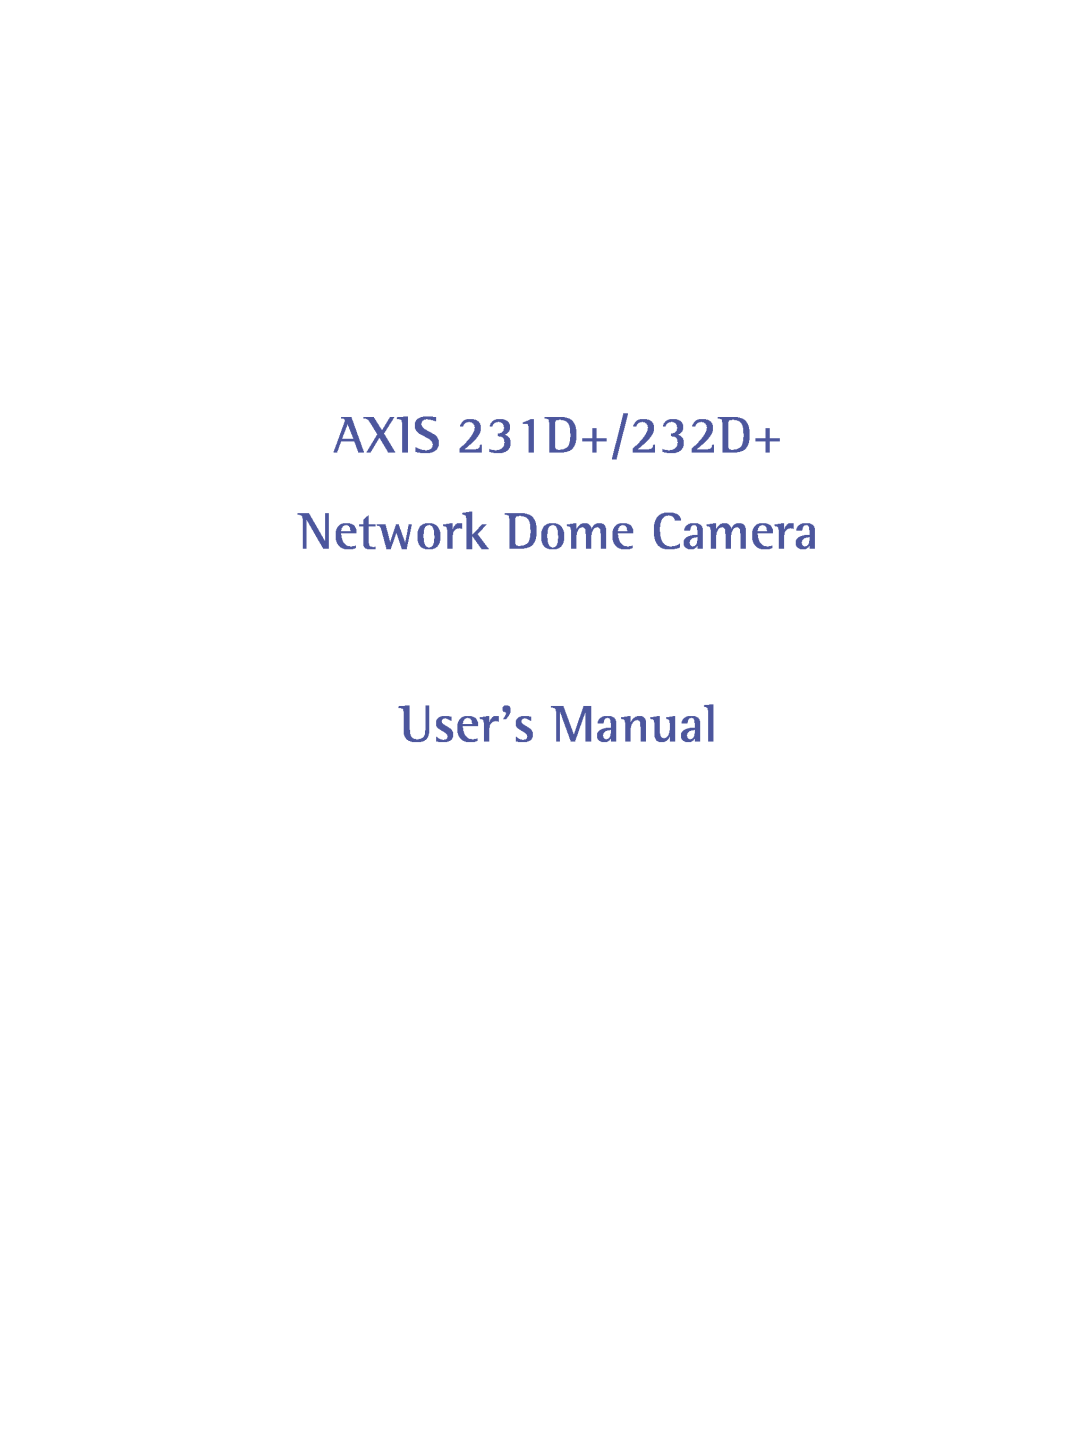 Axis Communications 232d+ user manual AXIS 231D+/232D+ Network Dome Camera User’s Manual 